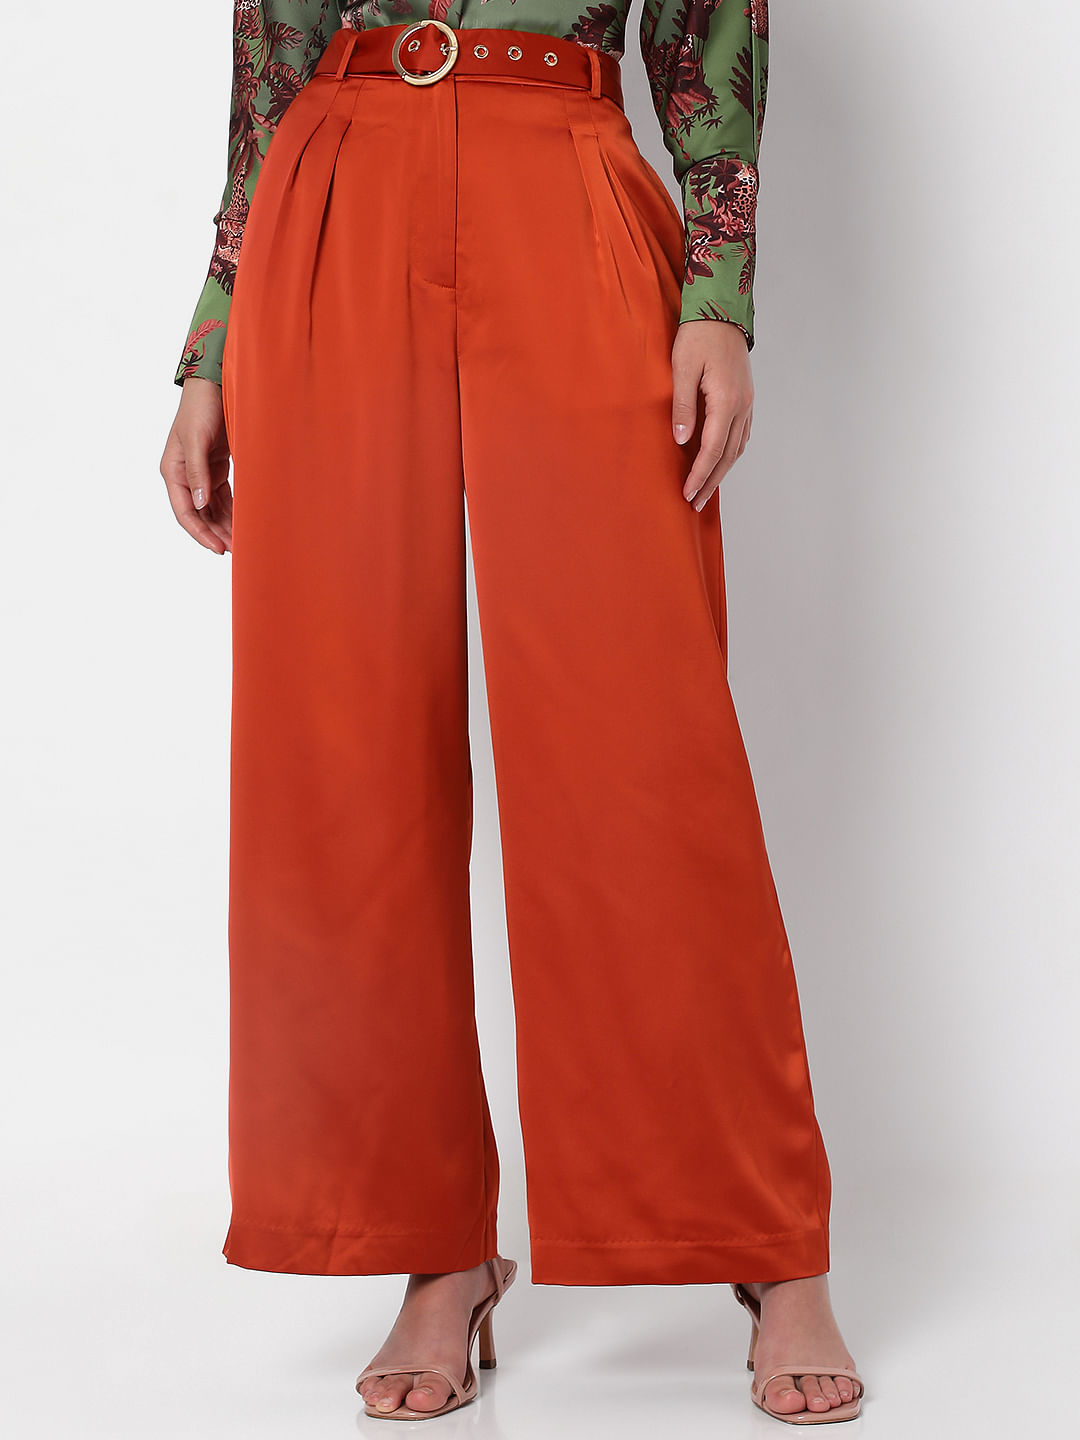 HighWaisted Ecofriendly Trousers with Hidden Side Zipper  Ankle Pants   Sustain Wear